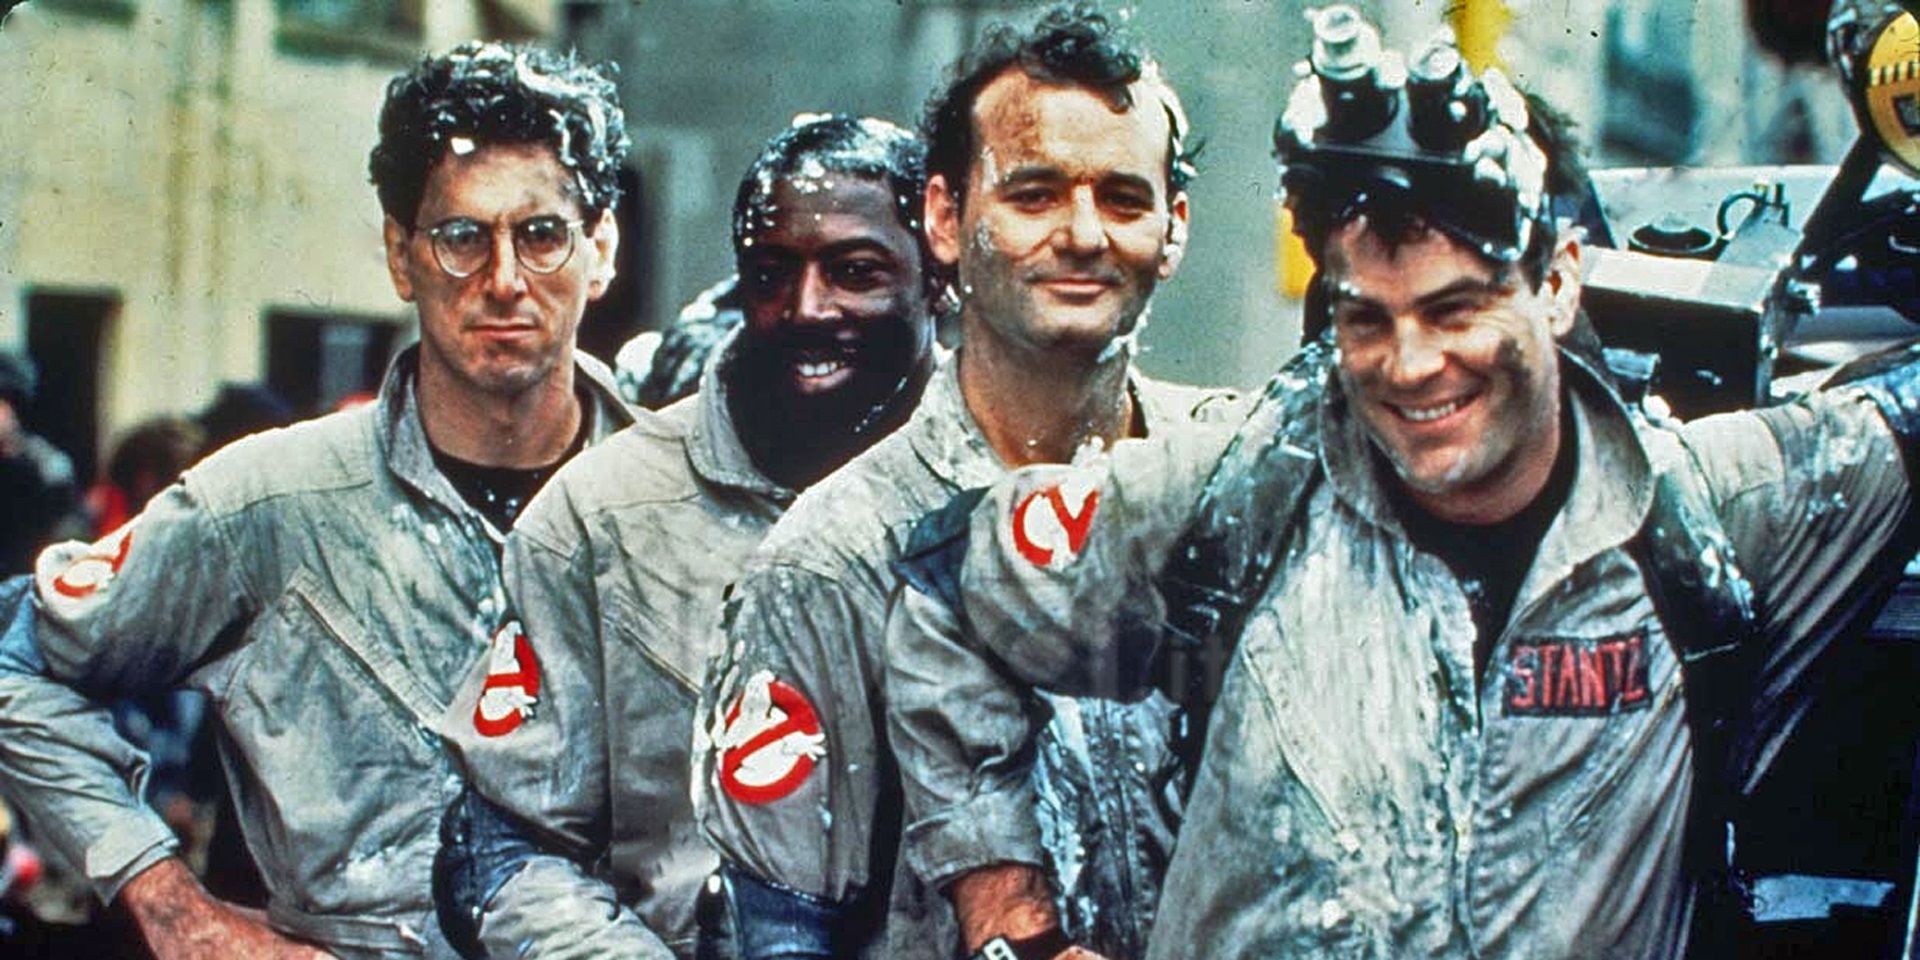 The cast of Ghostbusters covered in marshmallow goo